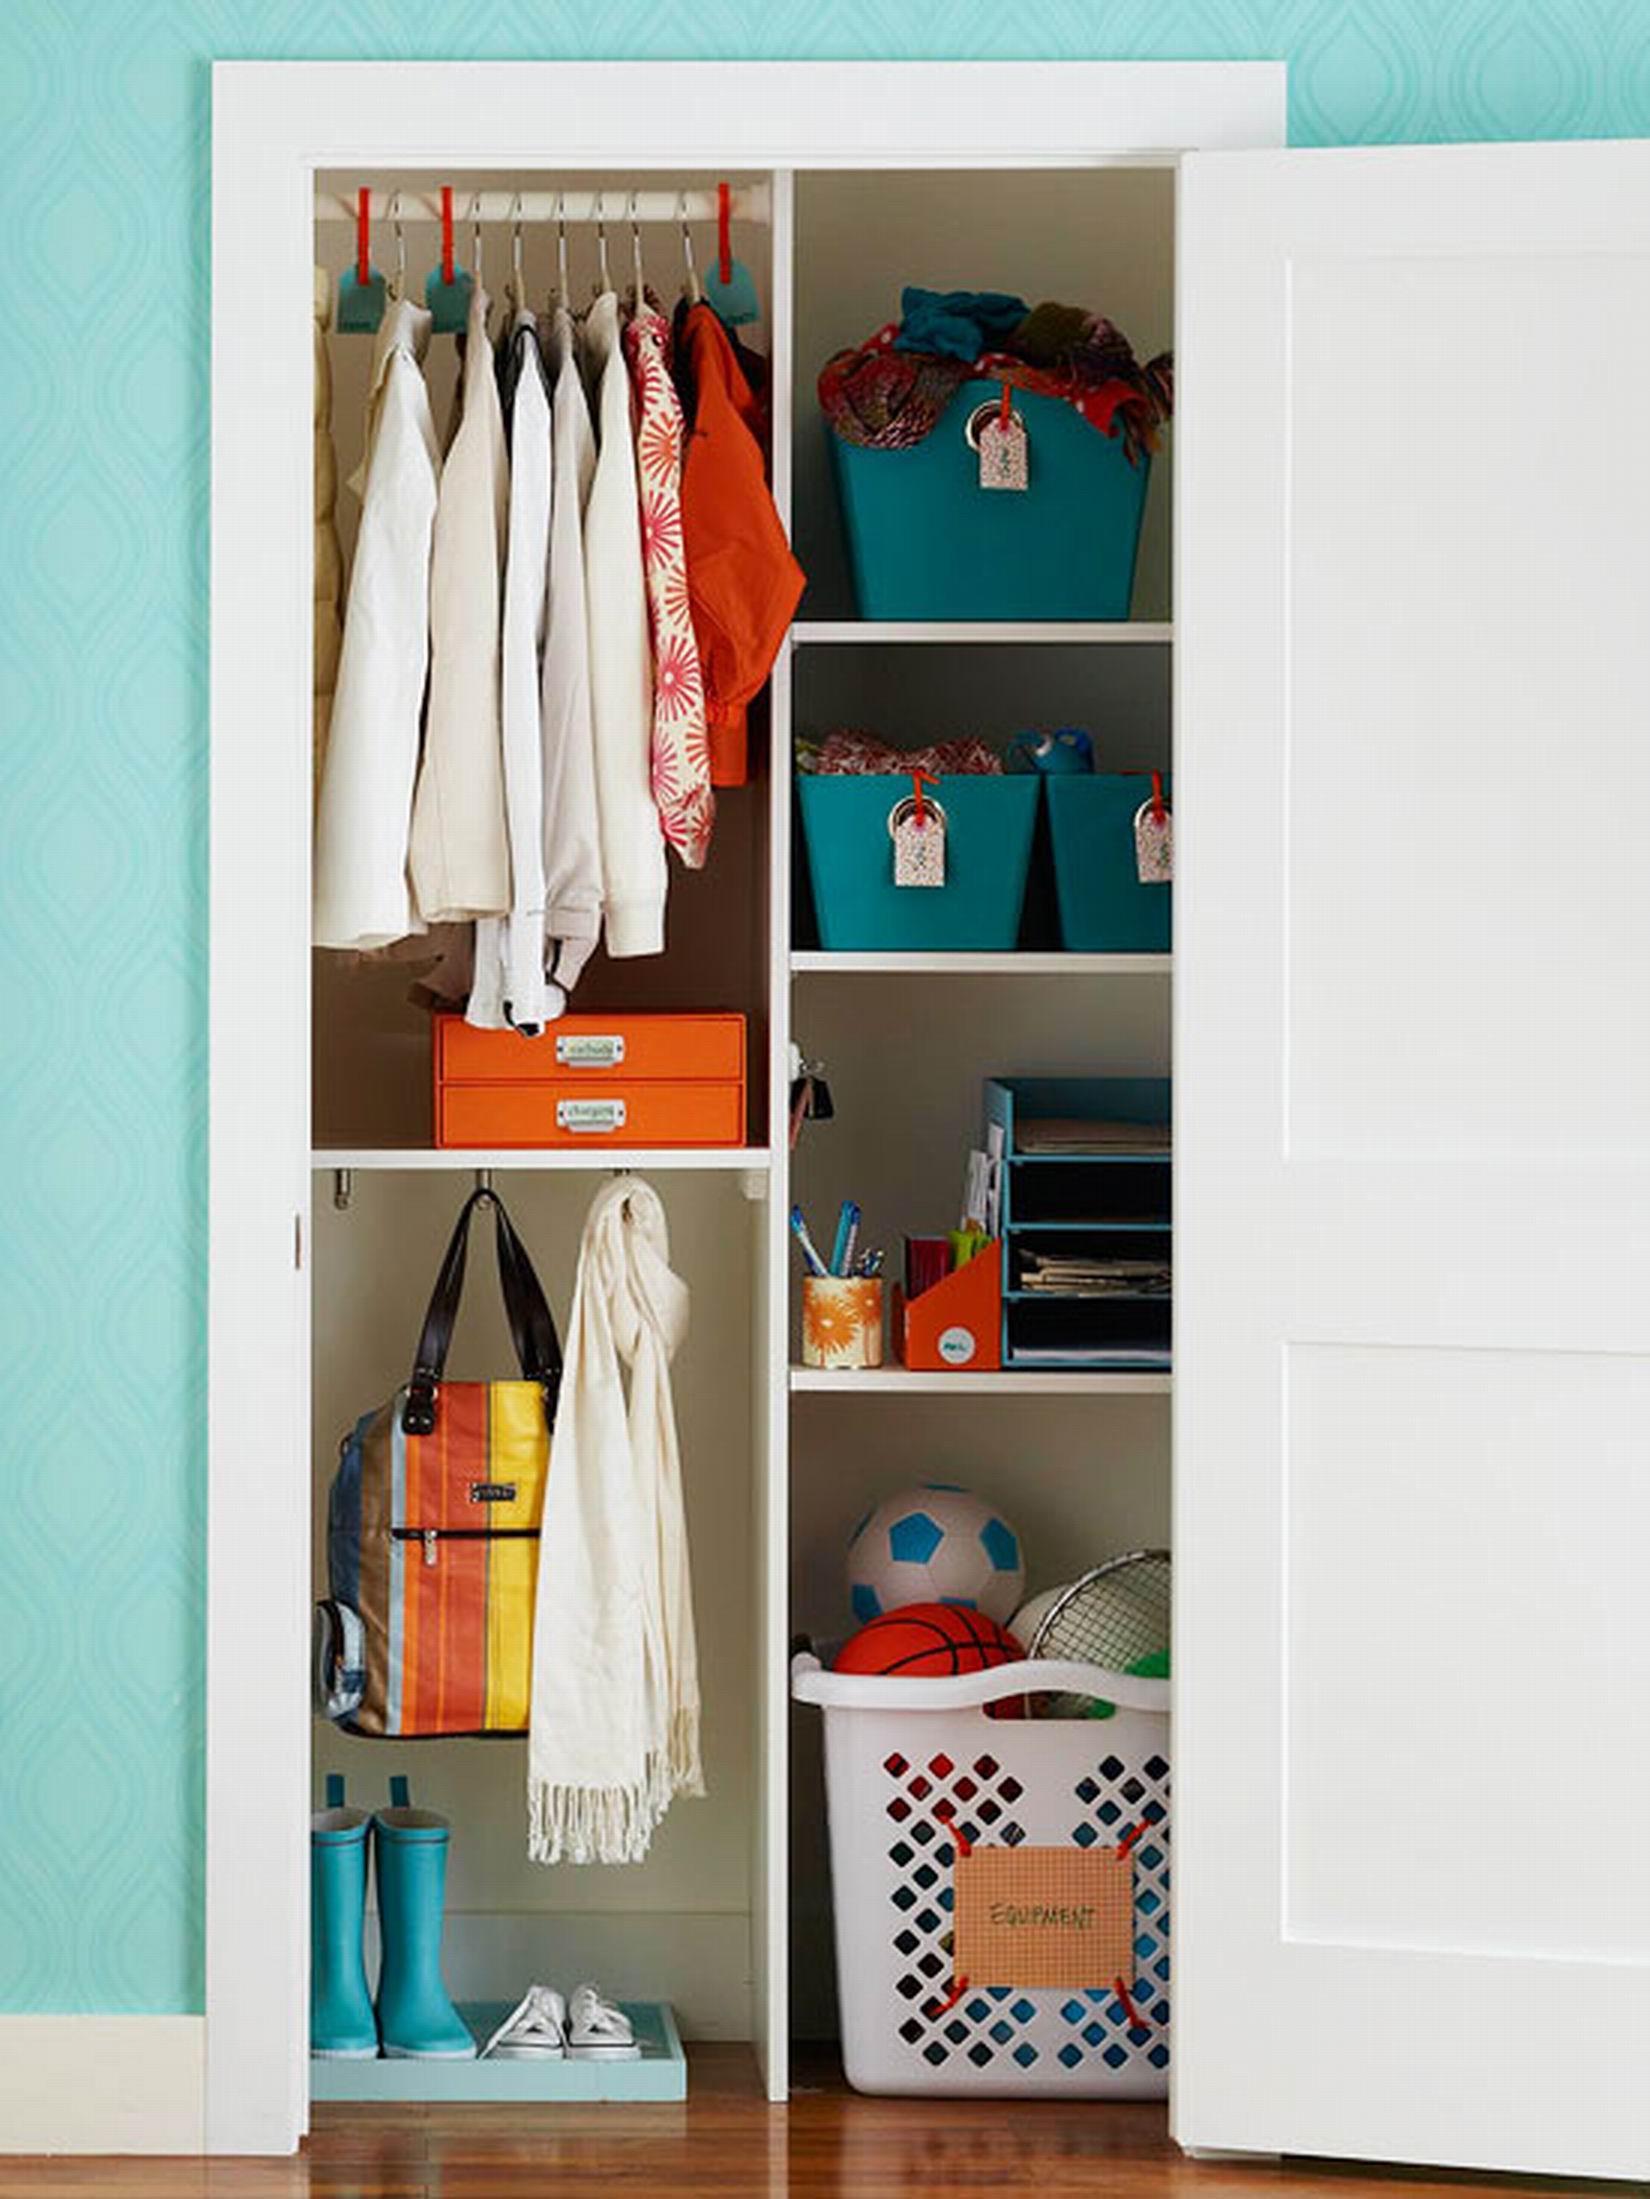 50 Best Closet Organization Ideas and Designs for 2017